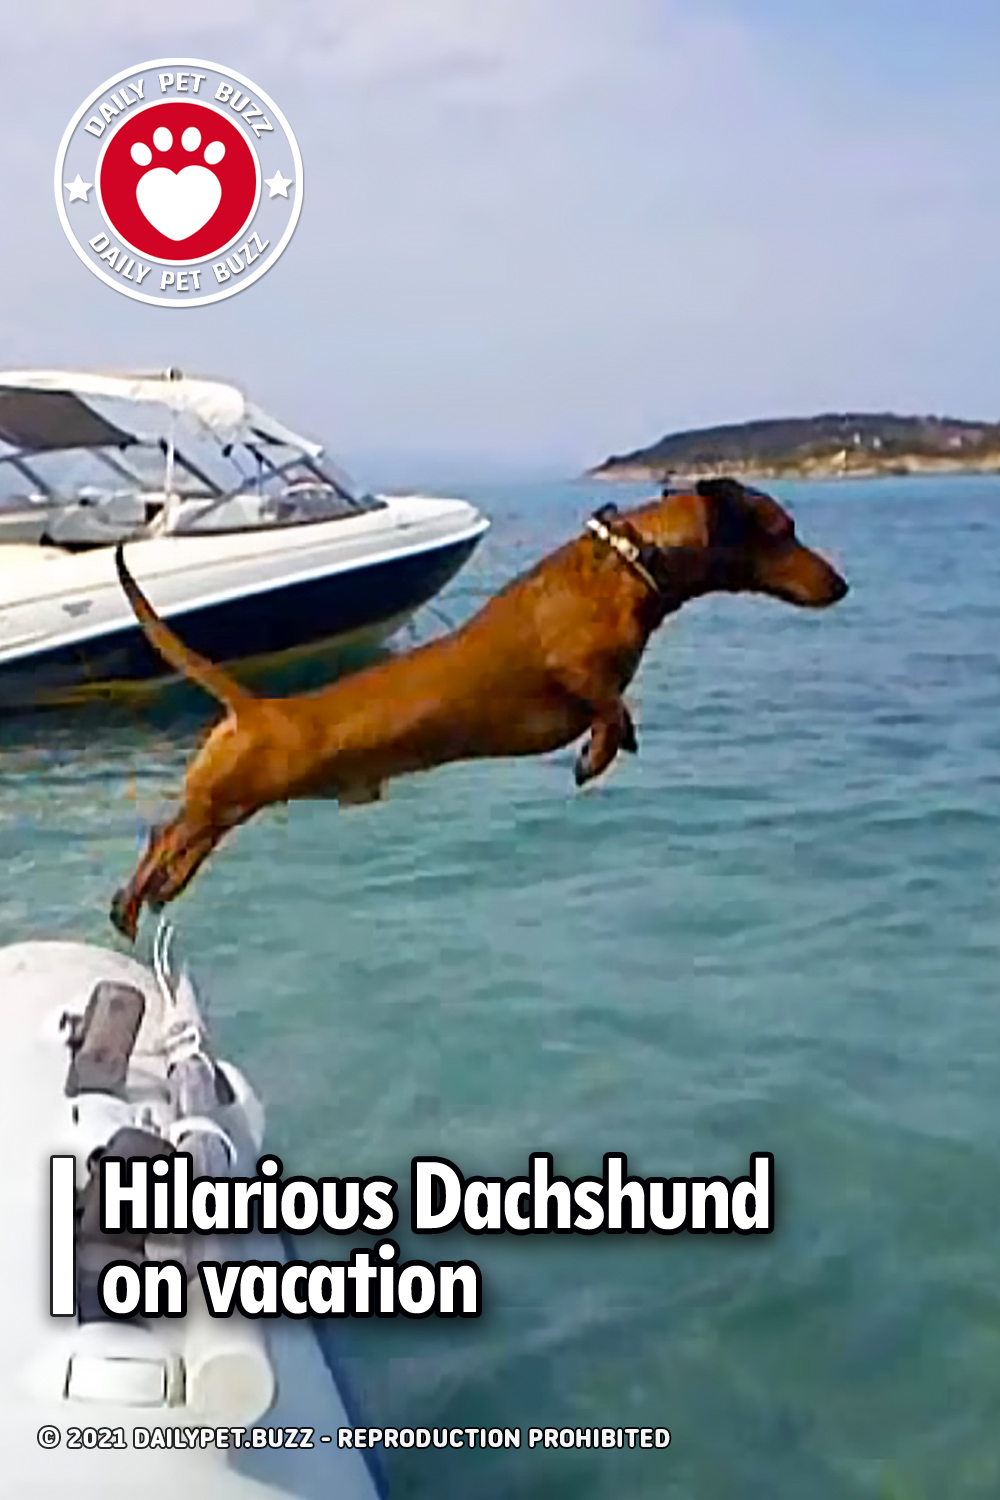 Hilarious Dachshund on vacation